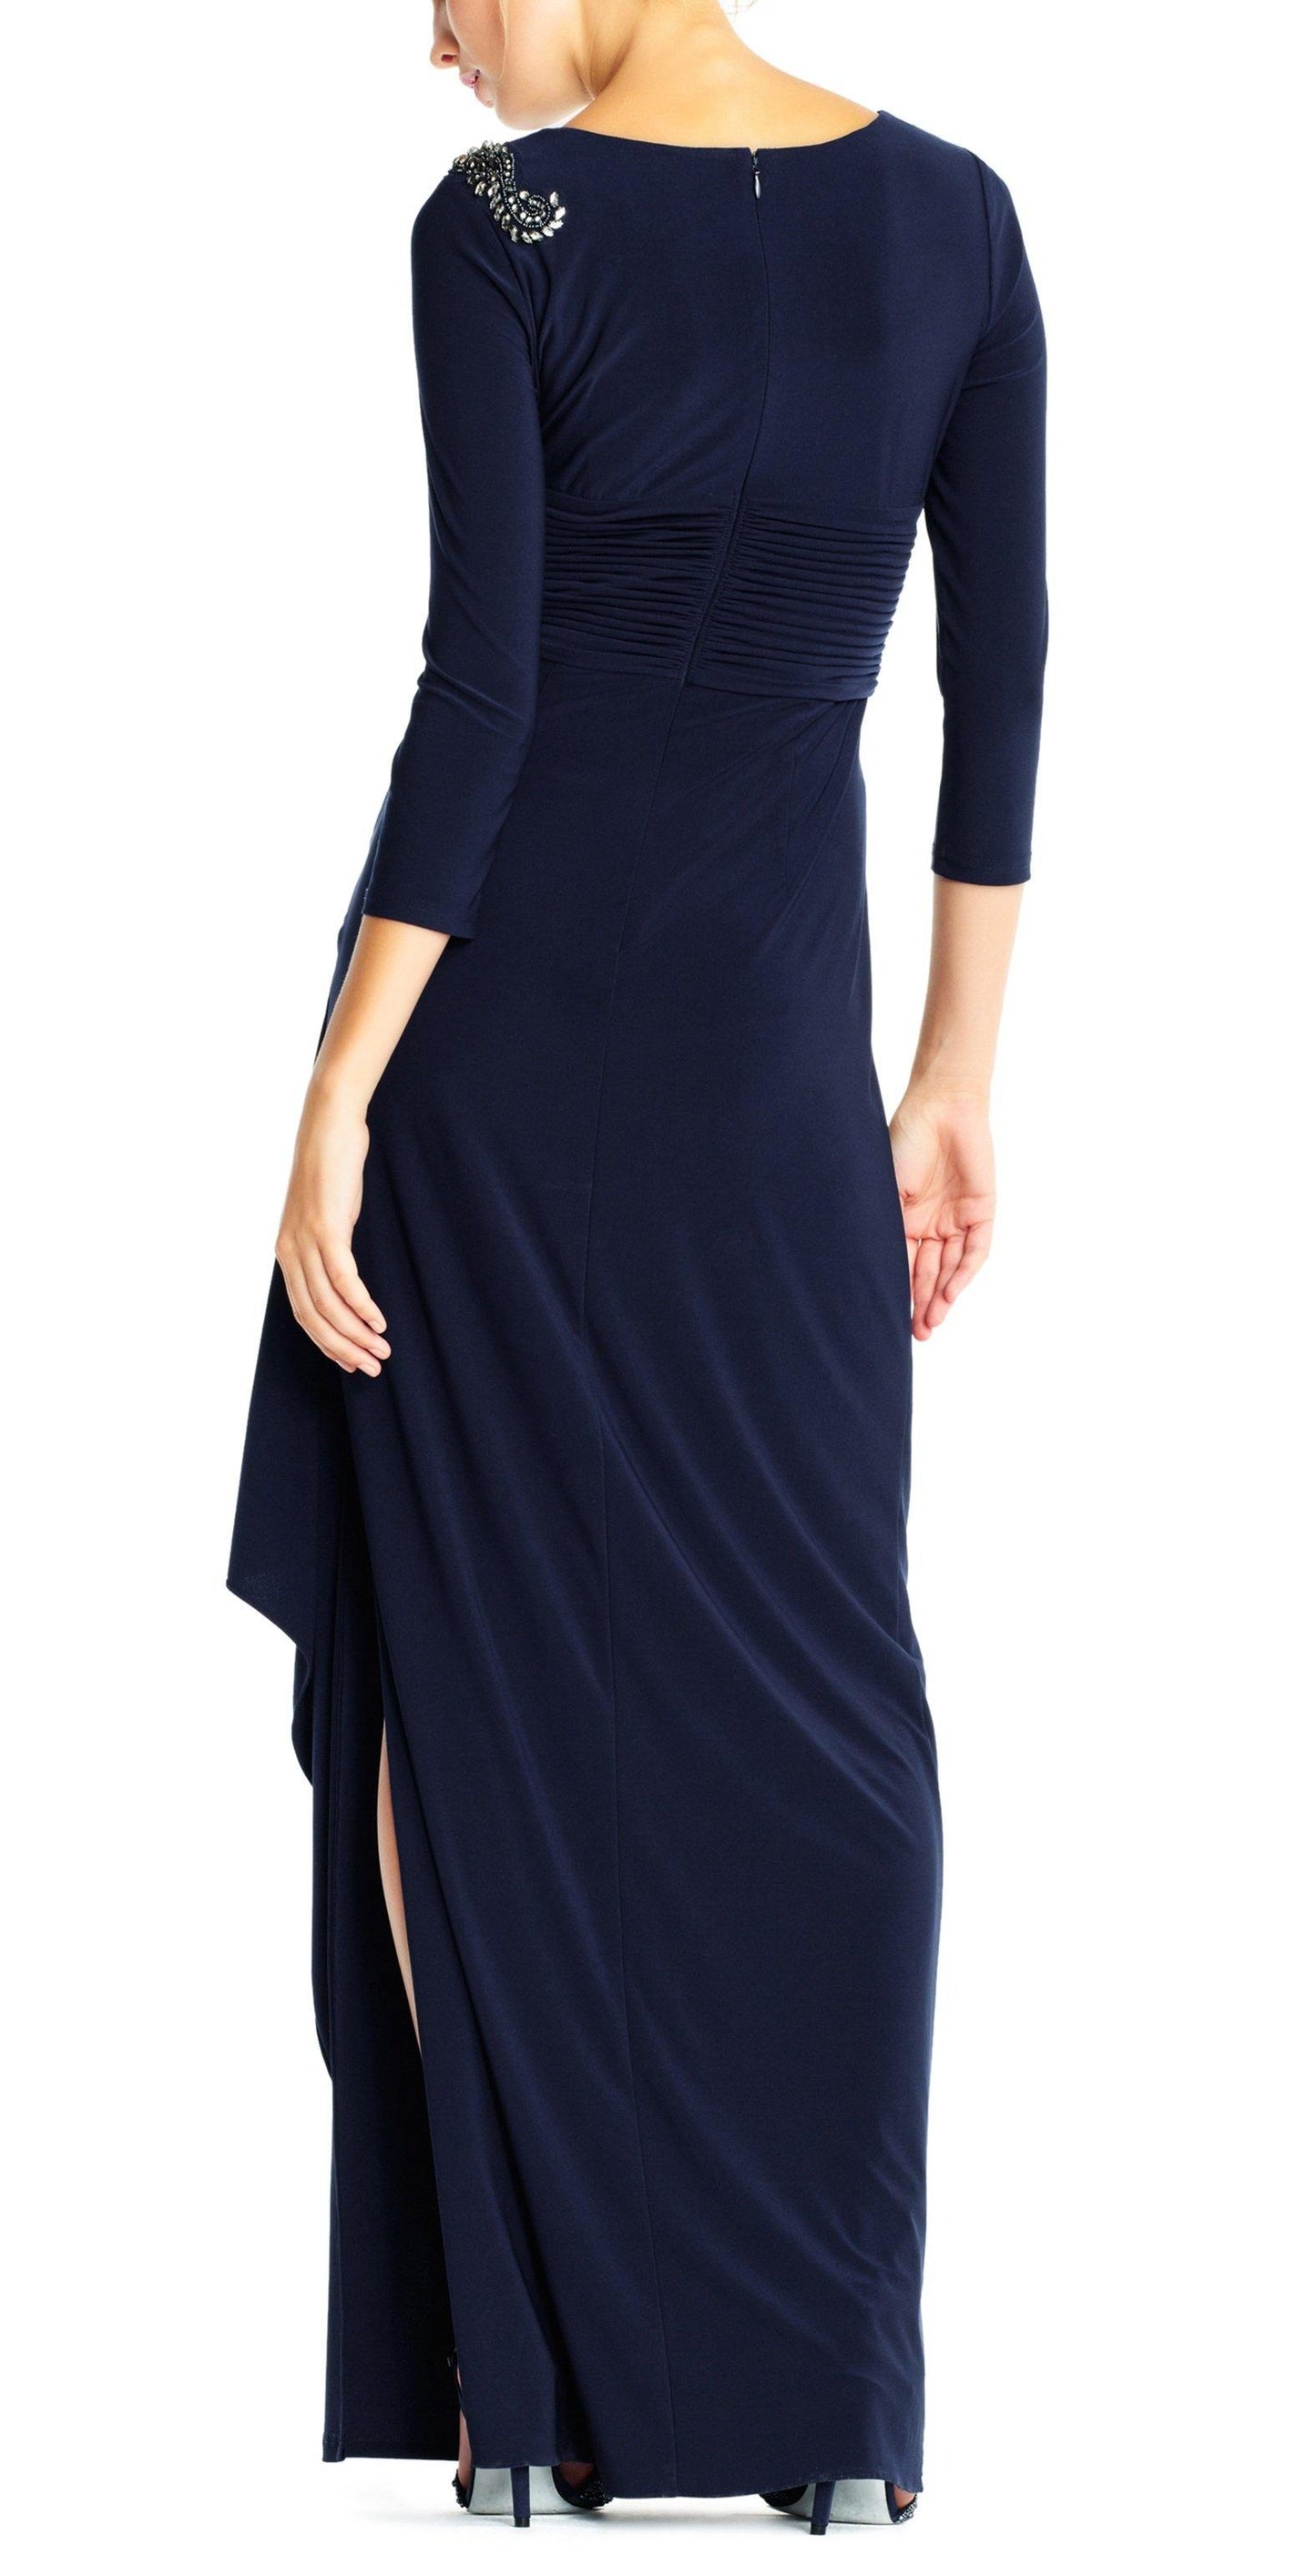 Adrianna Papell Long Sleeve Embellished Formal Dress - The Dress Outlet Adrianna Papell